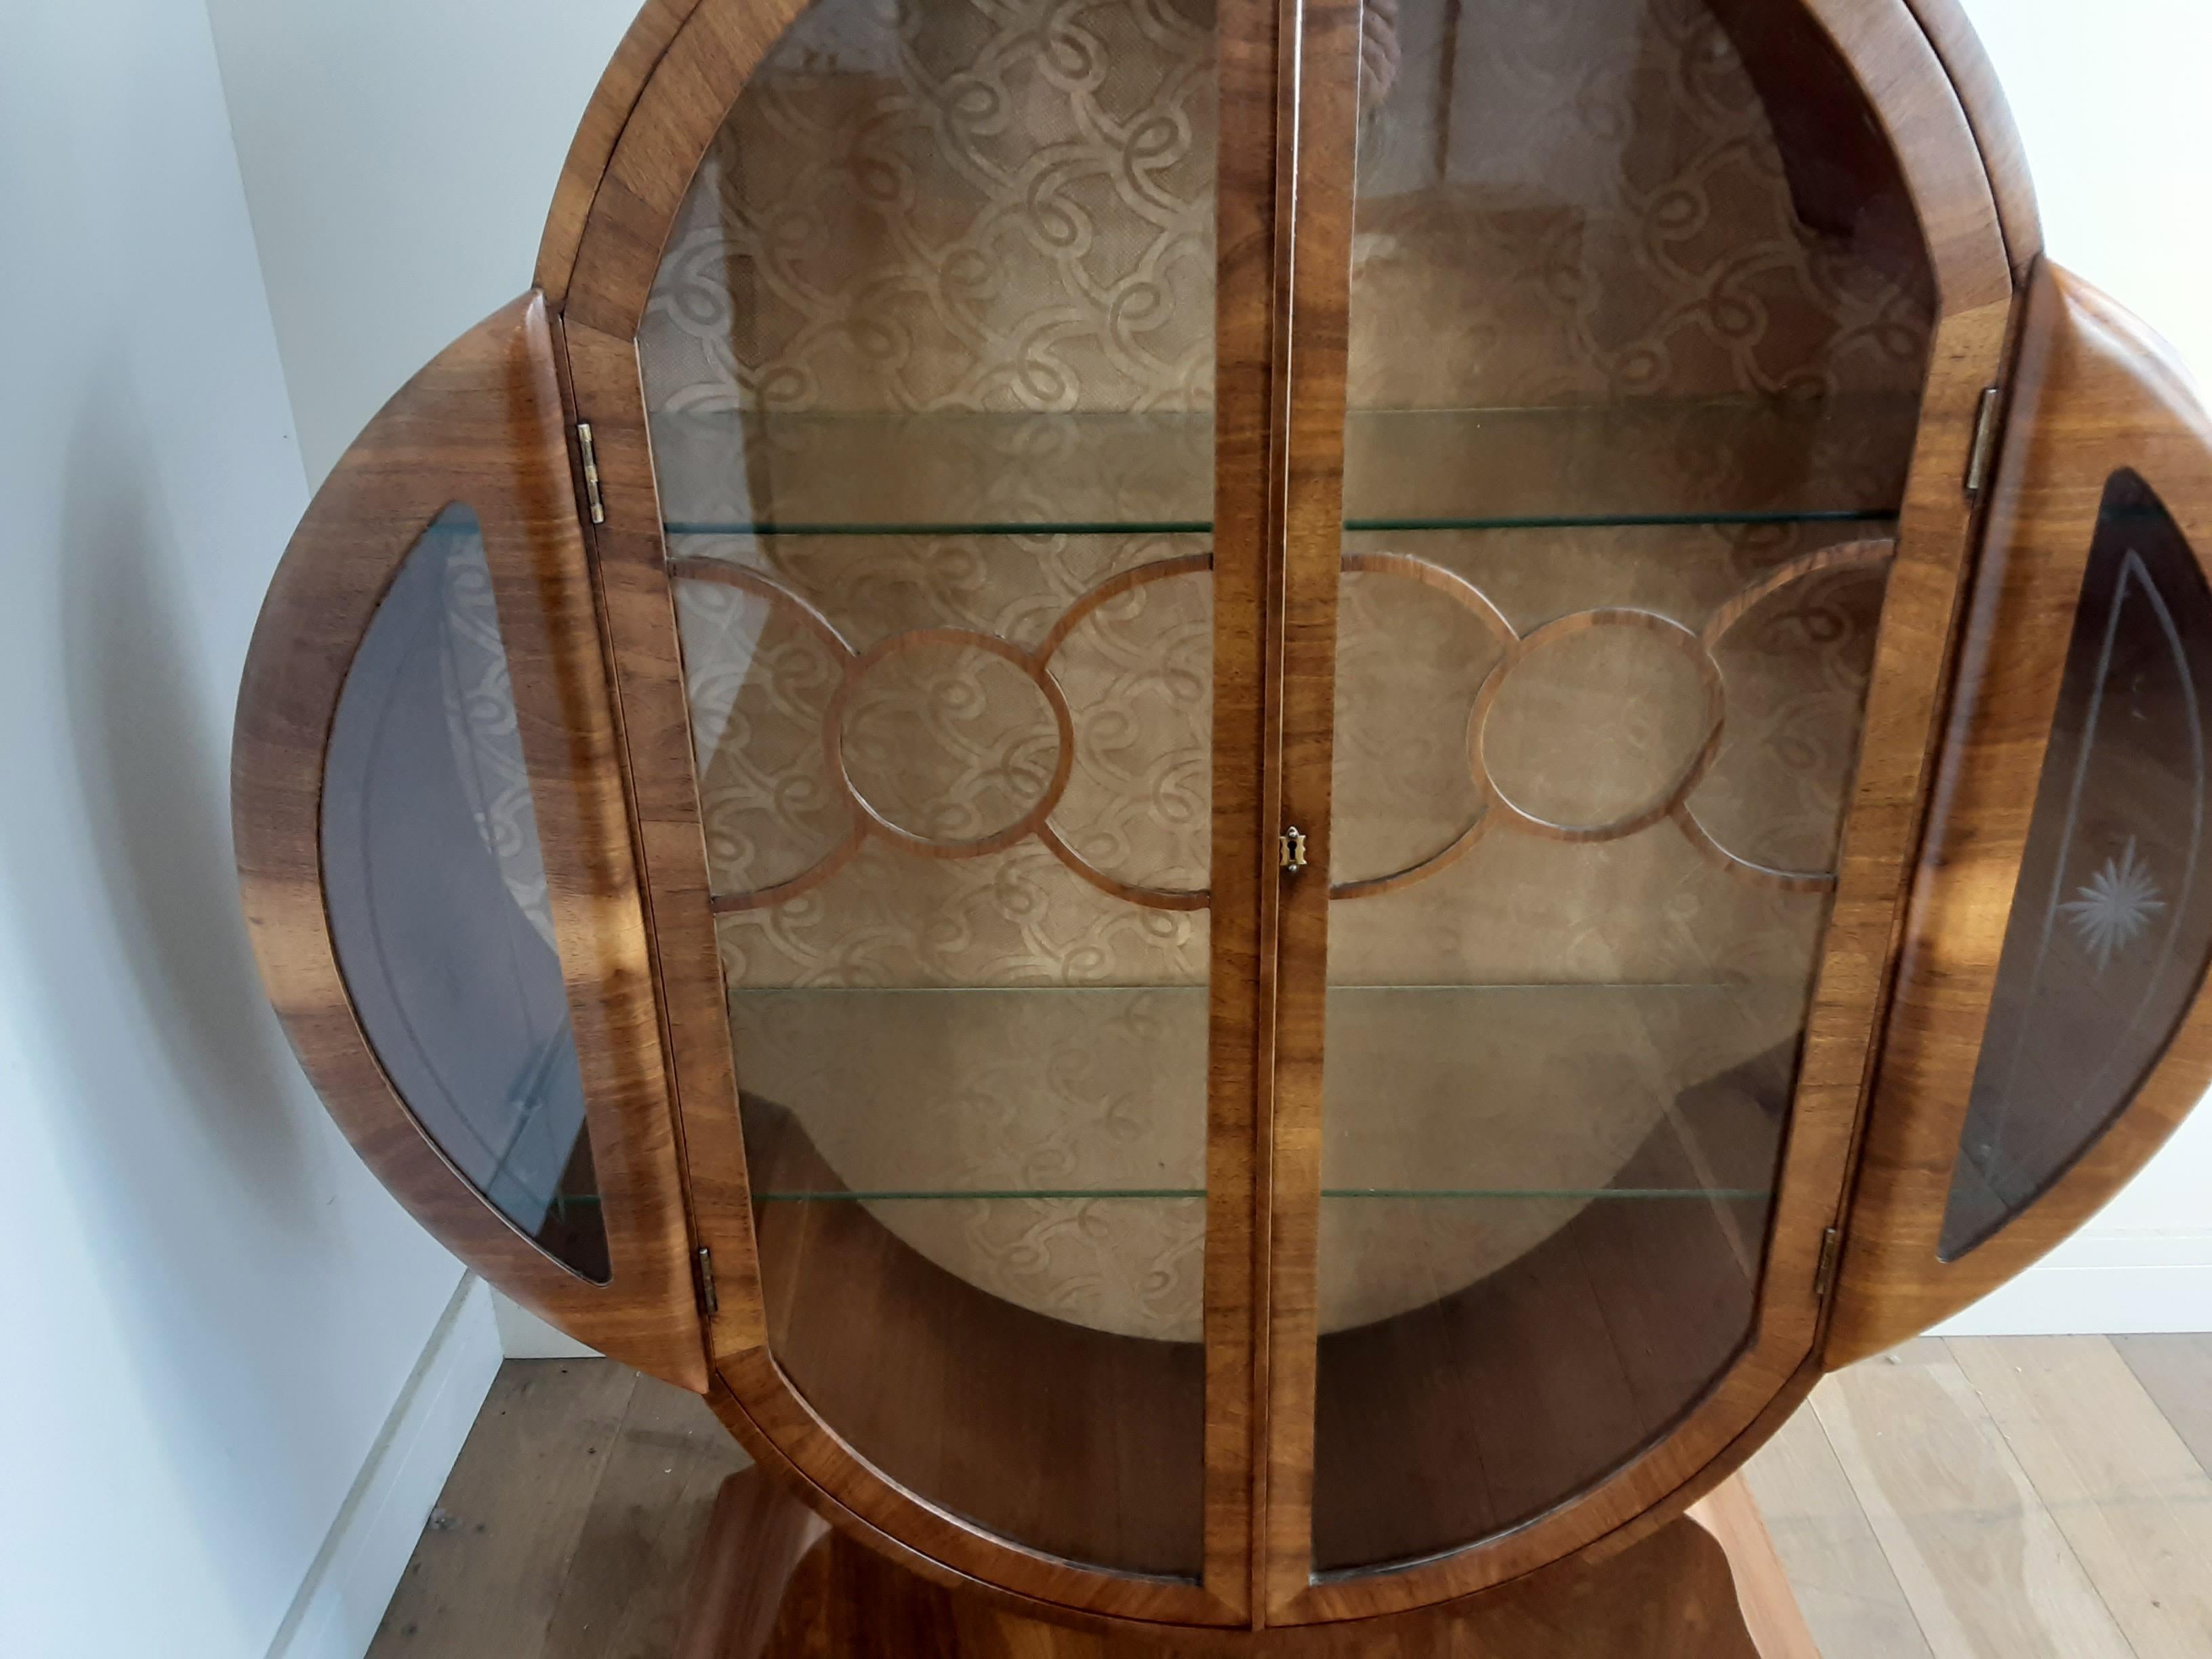 British Art Deco walnut display cabinet.
Stunning and rare cloud shape display cabinet in a nice figured walnut with a circular fretwork design to the glass panel doors.
British, circa 1930.
Measures: 139 cm H, 120 cm W, 32 cm D.